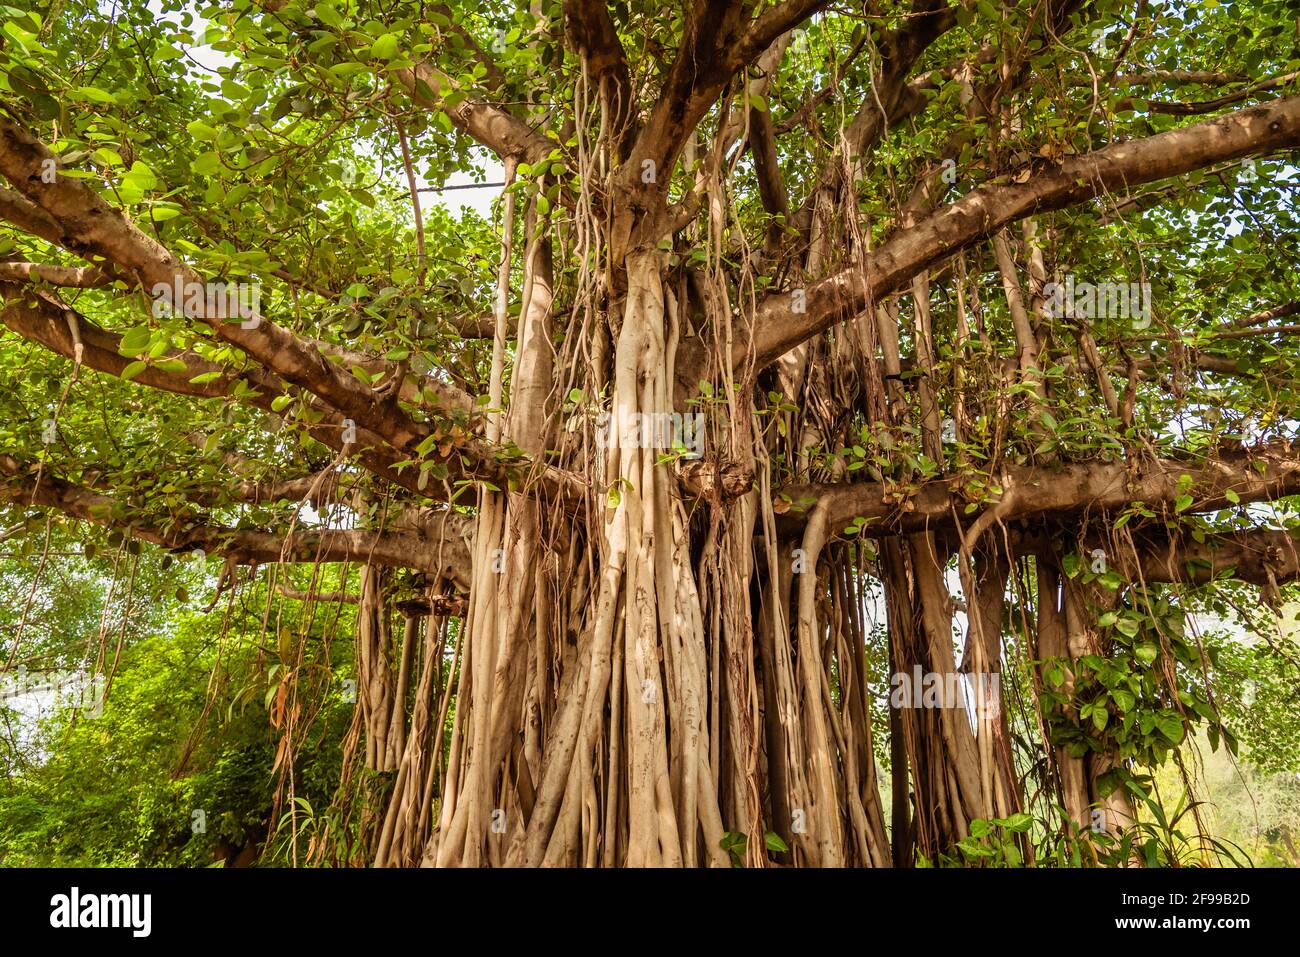 Banyan or banian is a fig that begins its life as an epiphyte. Ficus benghalensis or Indian banyan specifically denominates banyan species  & also the Stock Photo